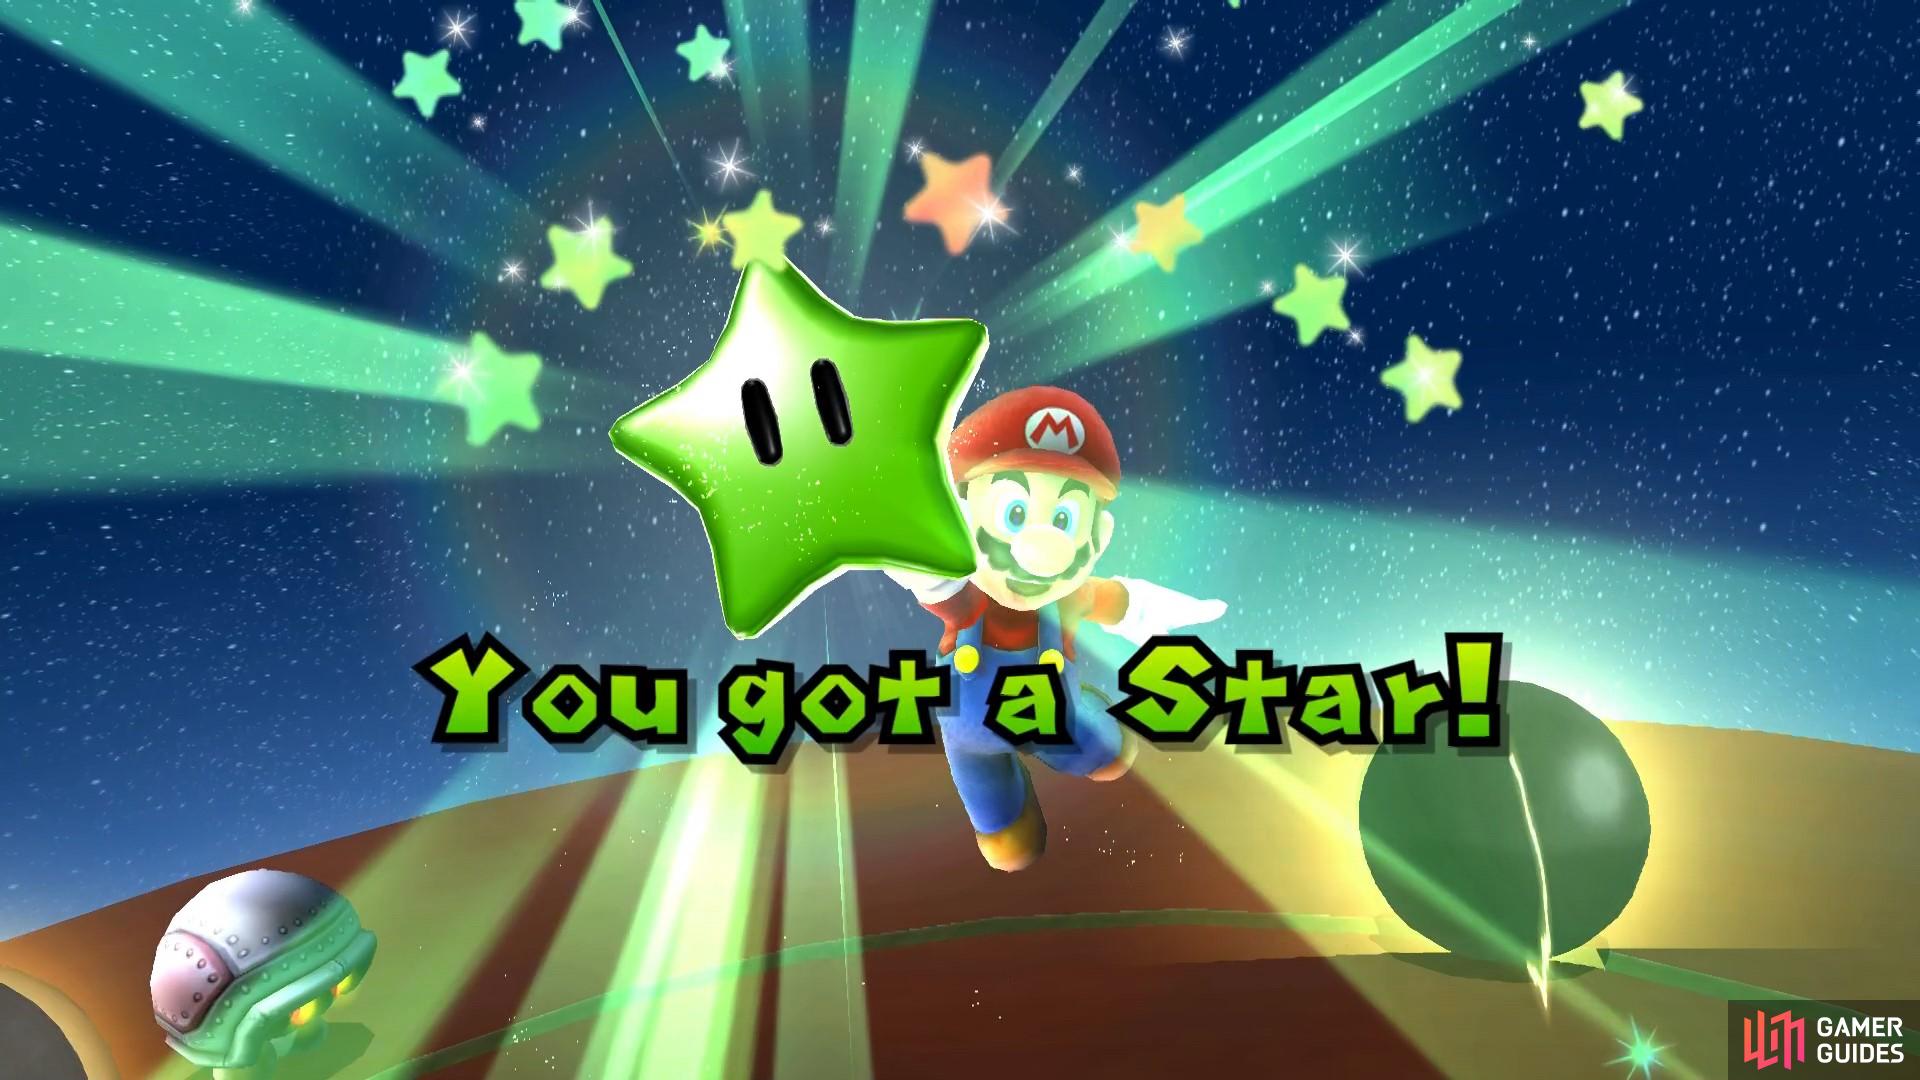 There are three Green Power Stars to collect!